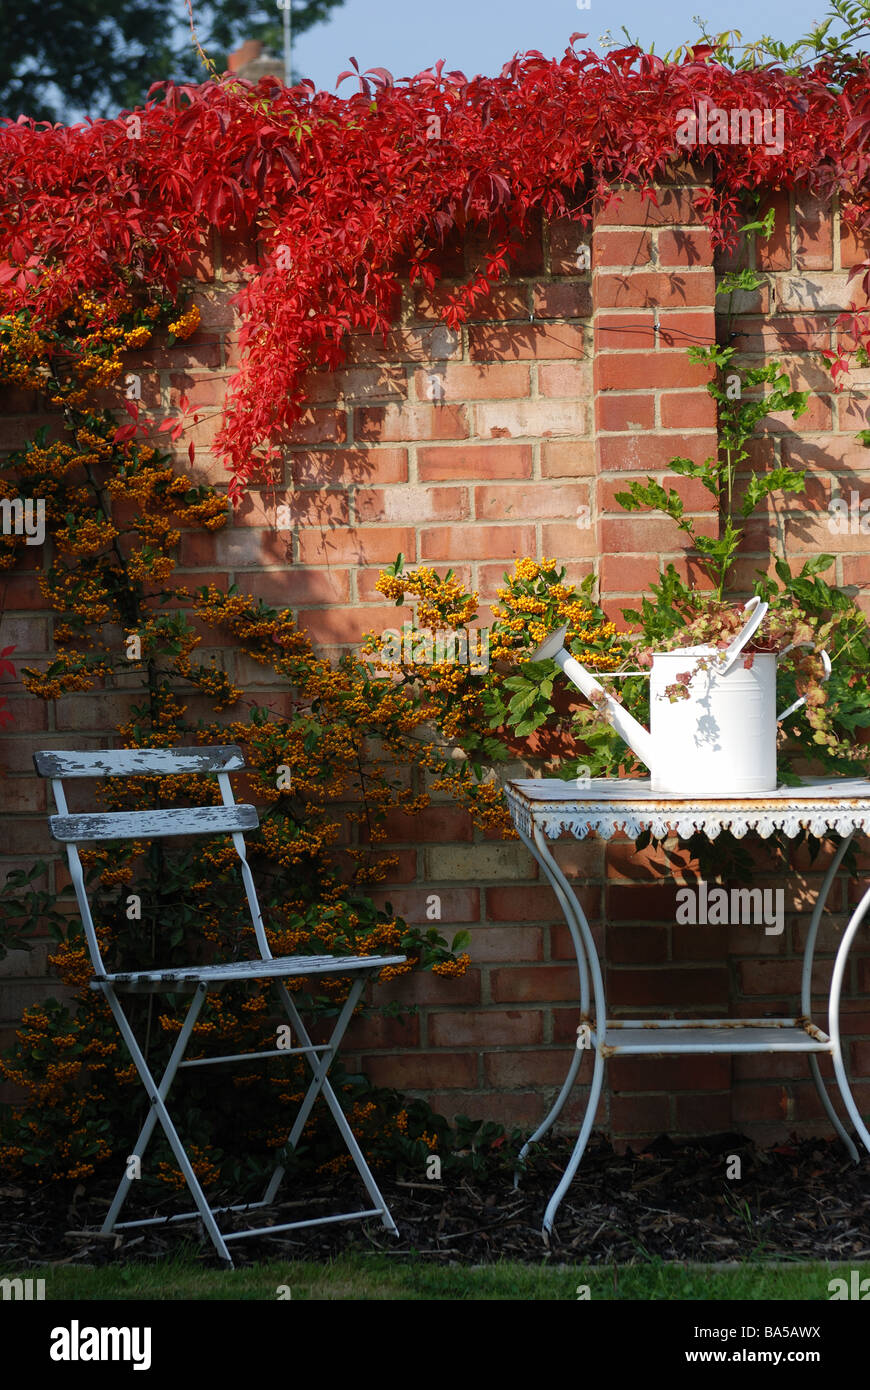 VIRGINIA CREEPER AND PYRACANTHA GROWING ON WALL IN GARDEN WITH TABLE AND CHAIRS IN FOREGROUND Stock Photo